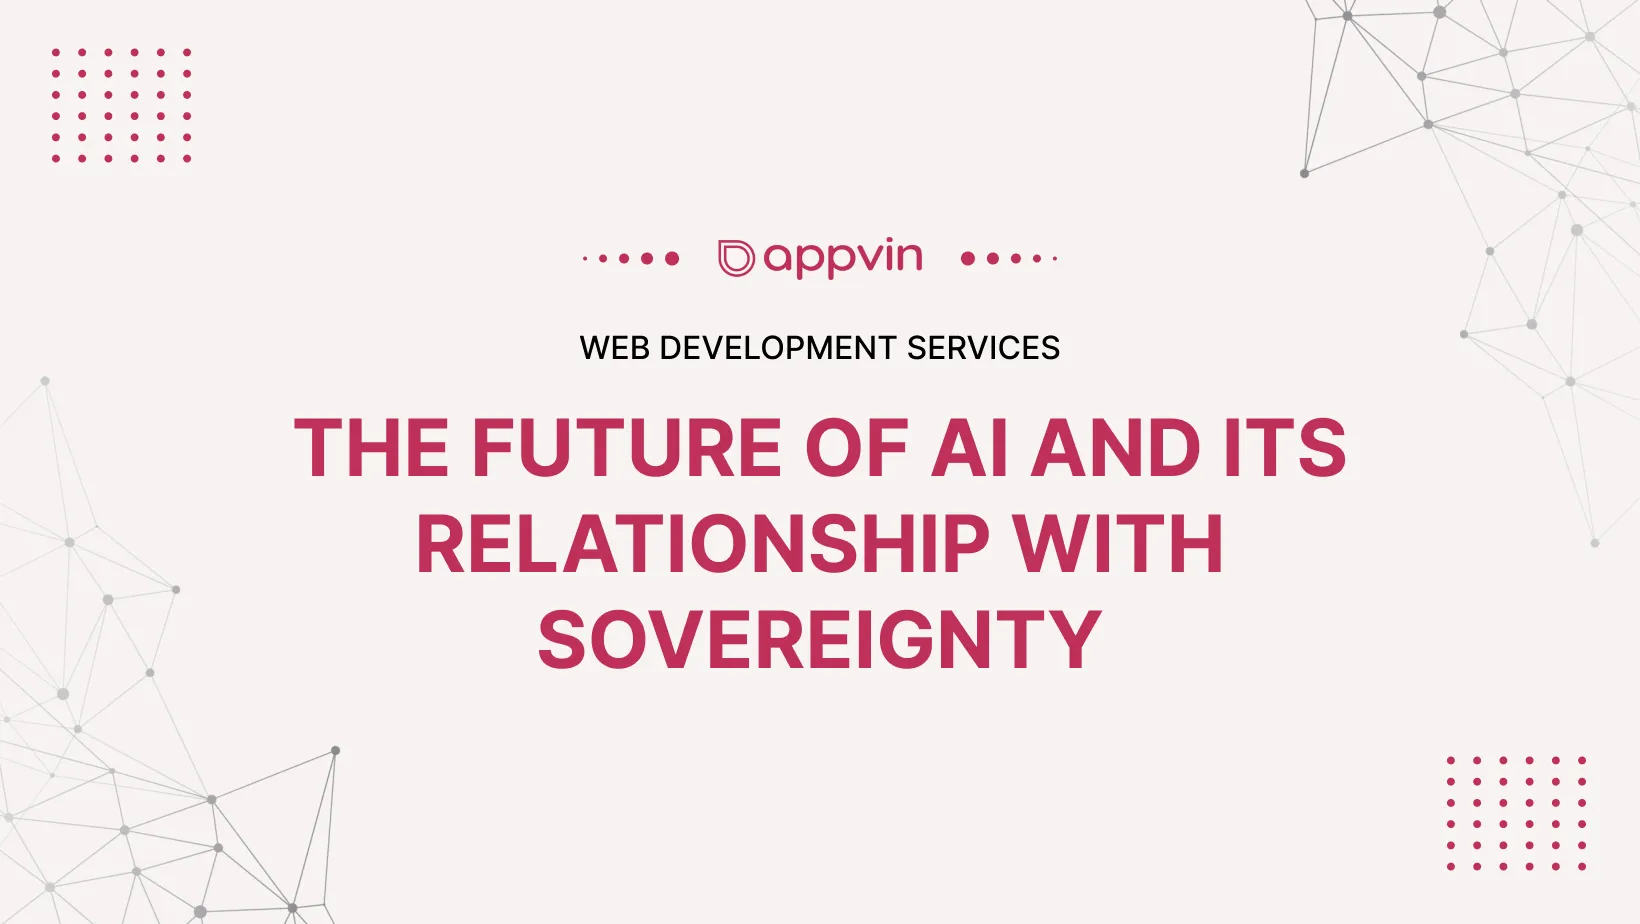 The Future of AI and its Relationship with Sovereignty